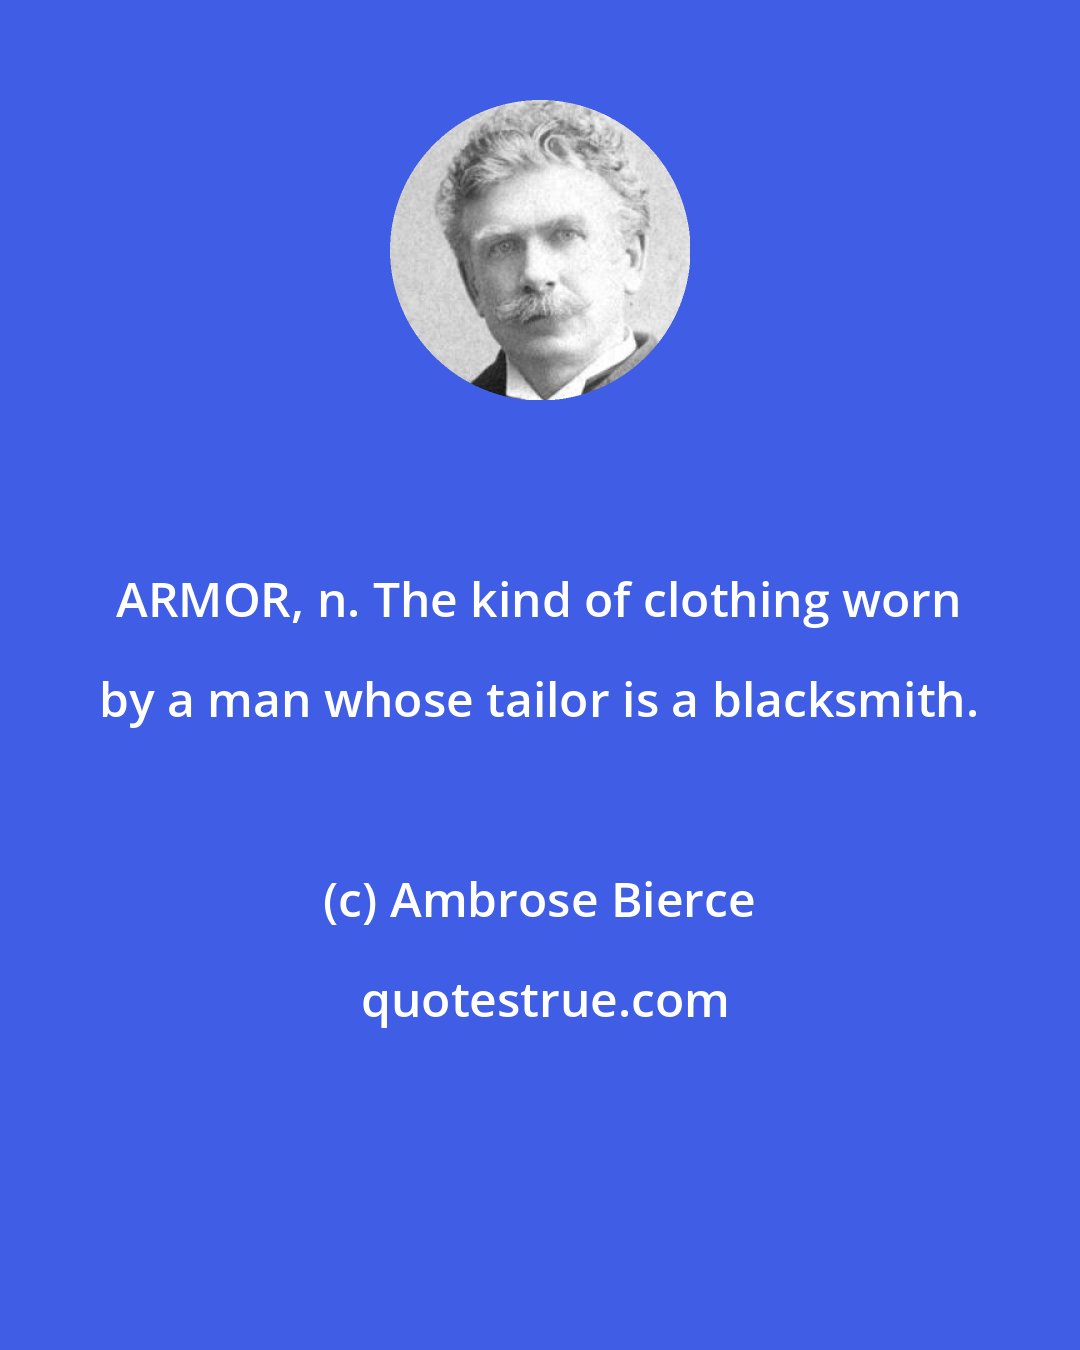 Ambrose Bierce: ARMOR, n. The kind of clothing worn by a man whose tailor is a blacksmith.